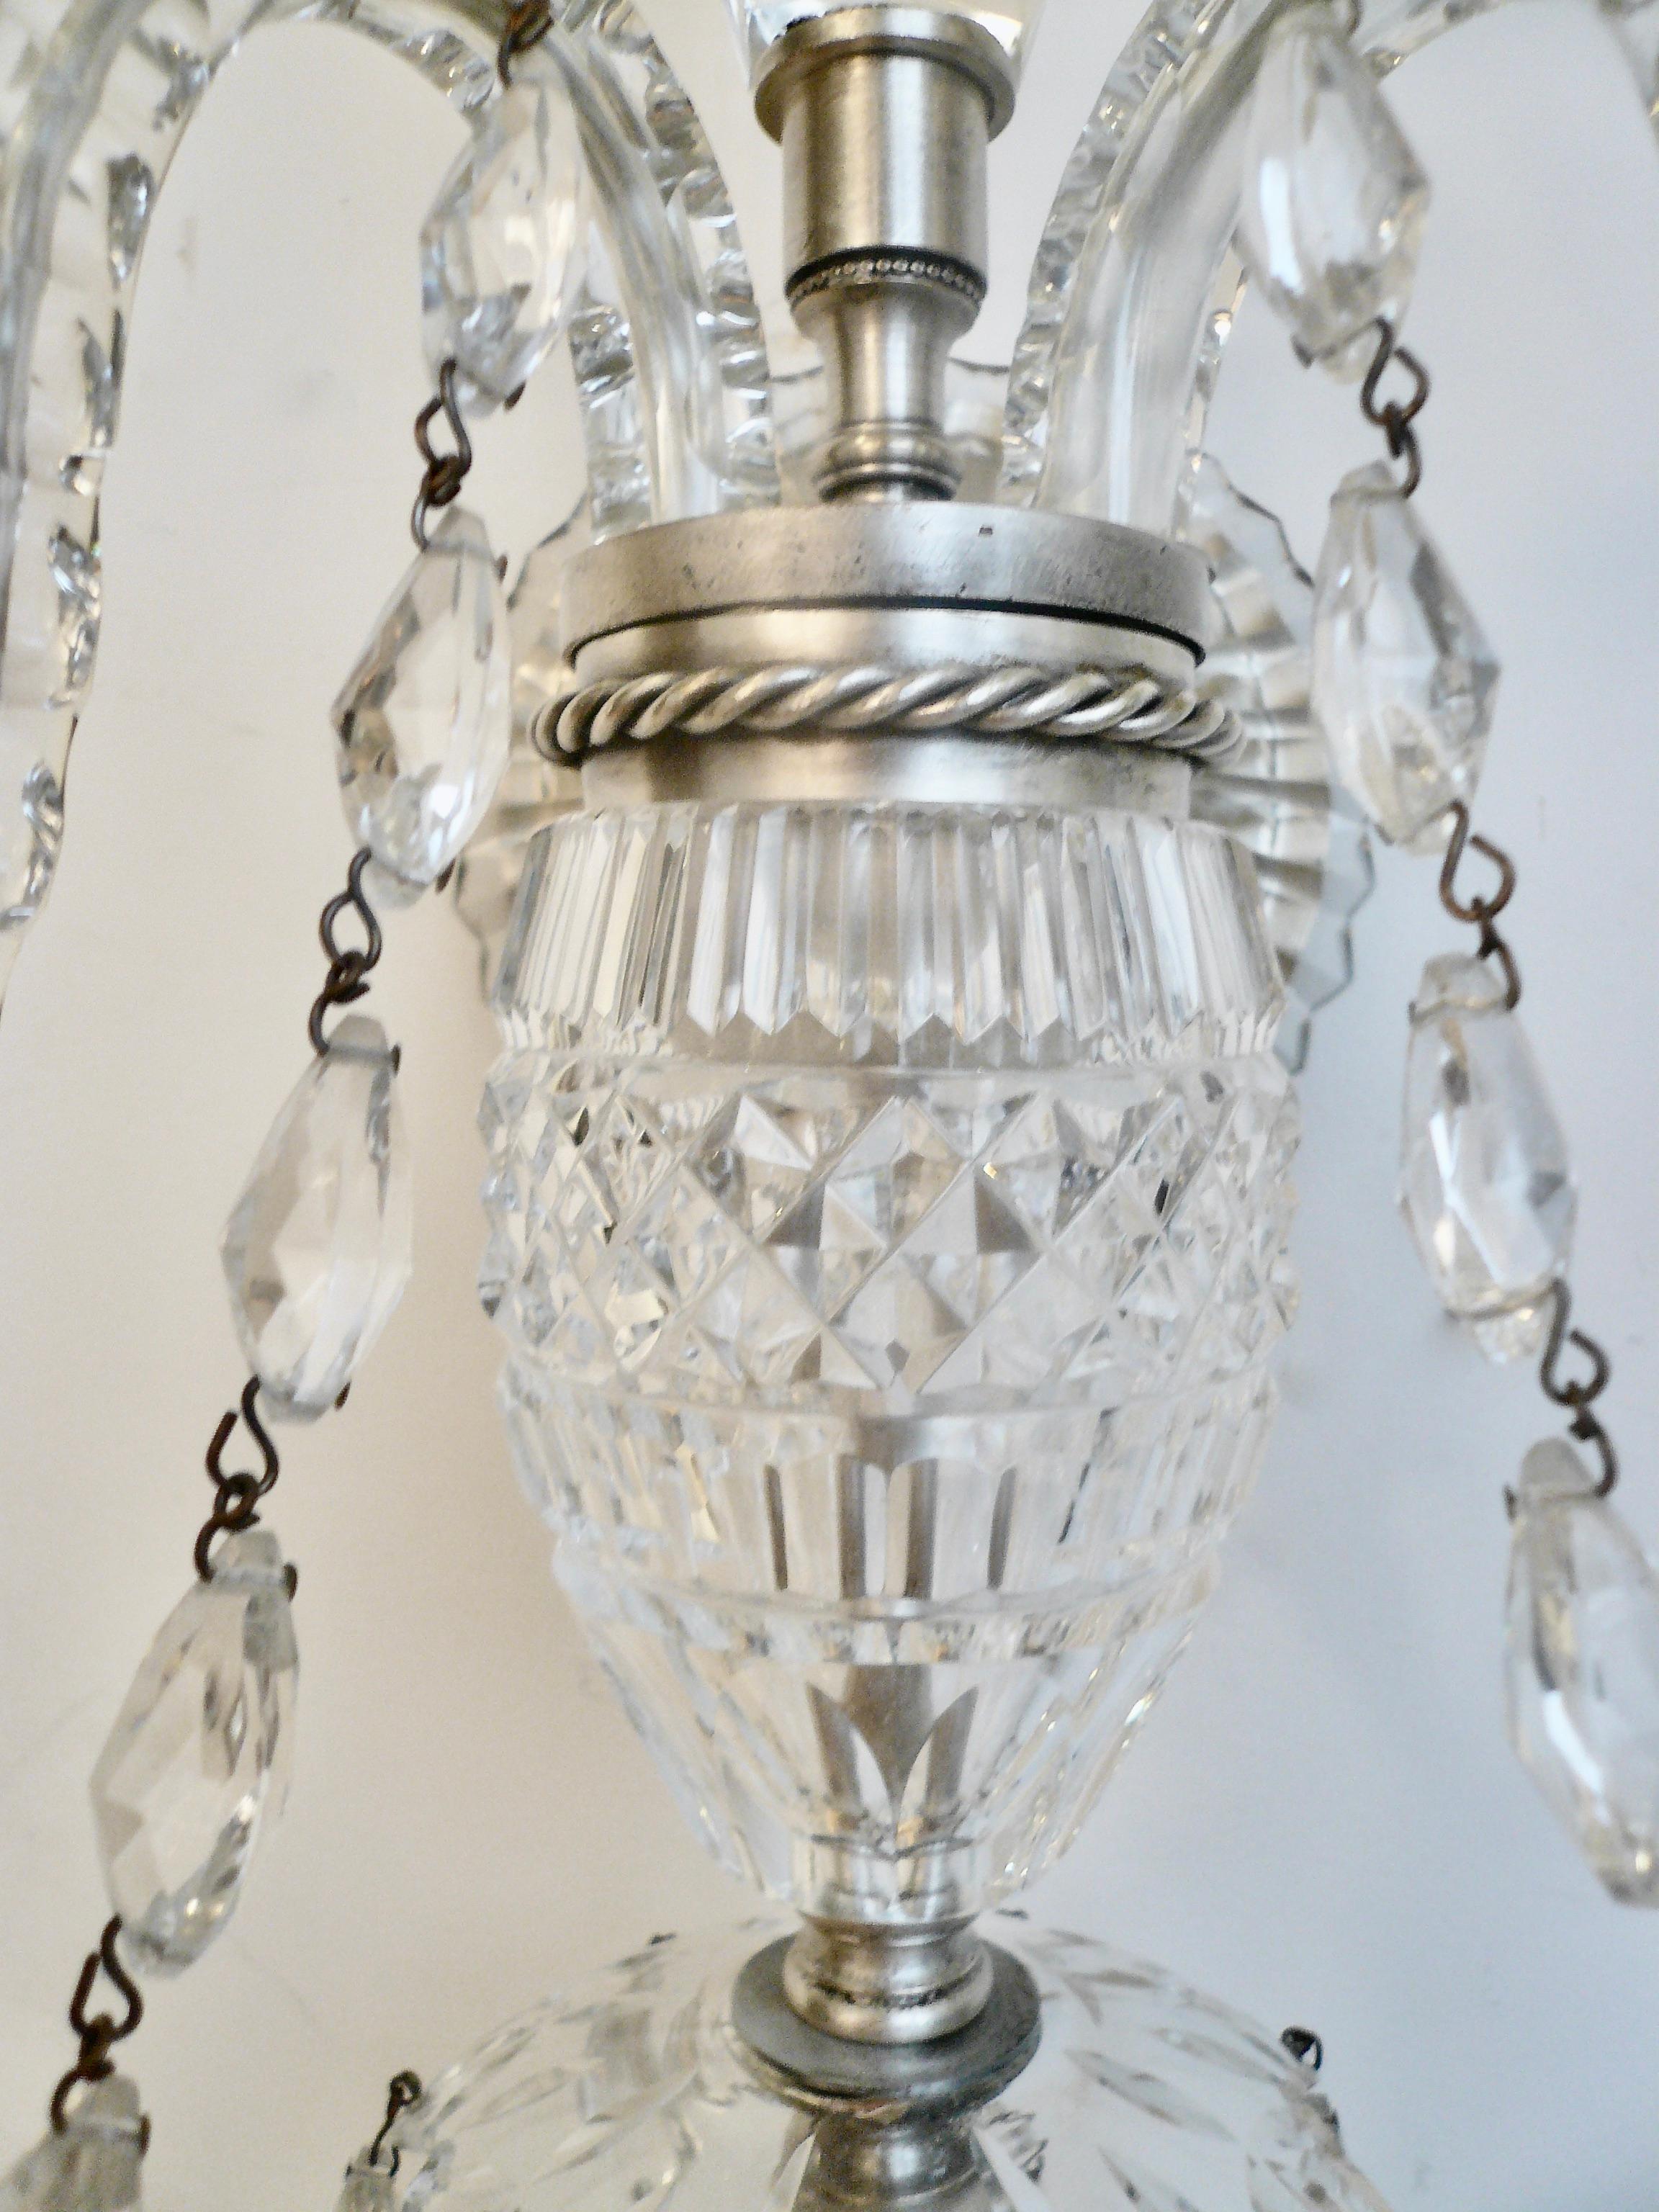 Faceted A Grand Scale Pair Cut Crystal Georgian Design Sconces in the Waterford Style For Sale